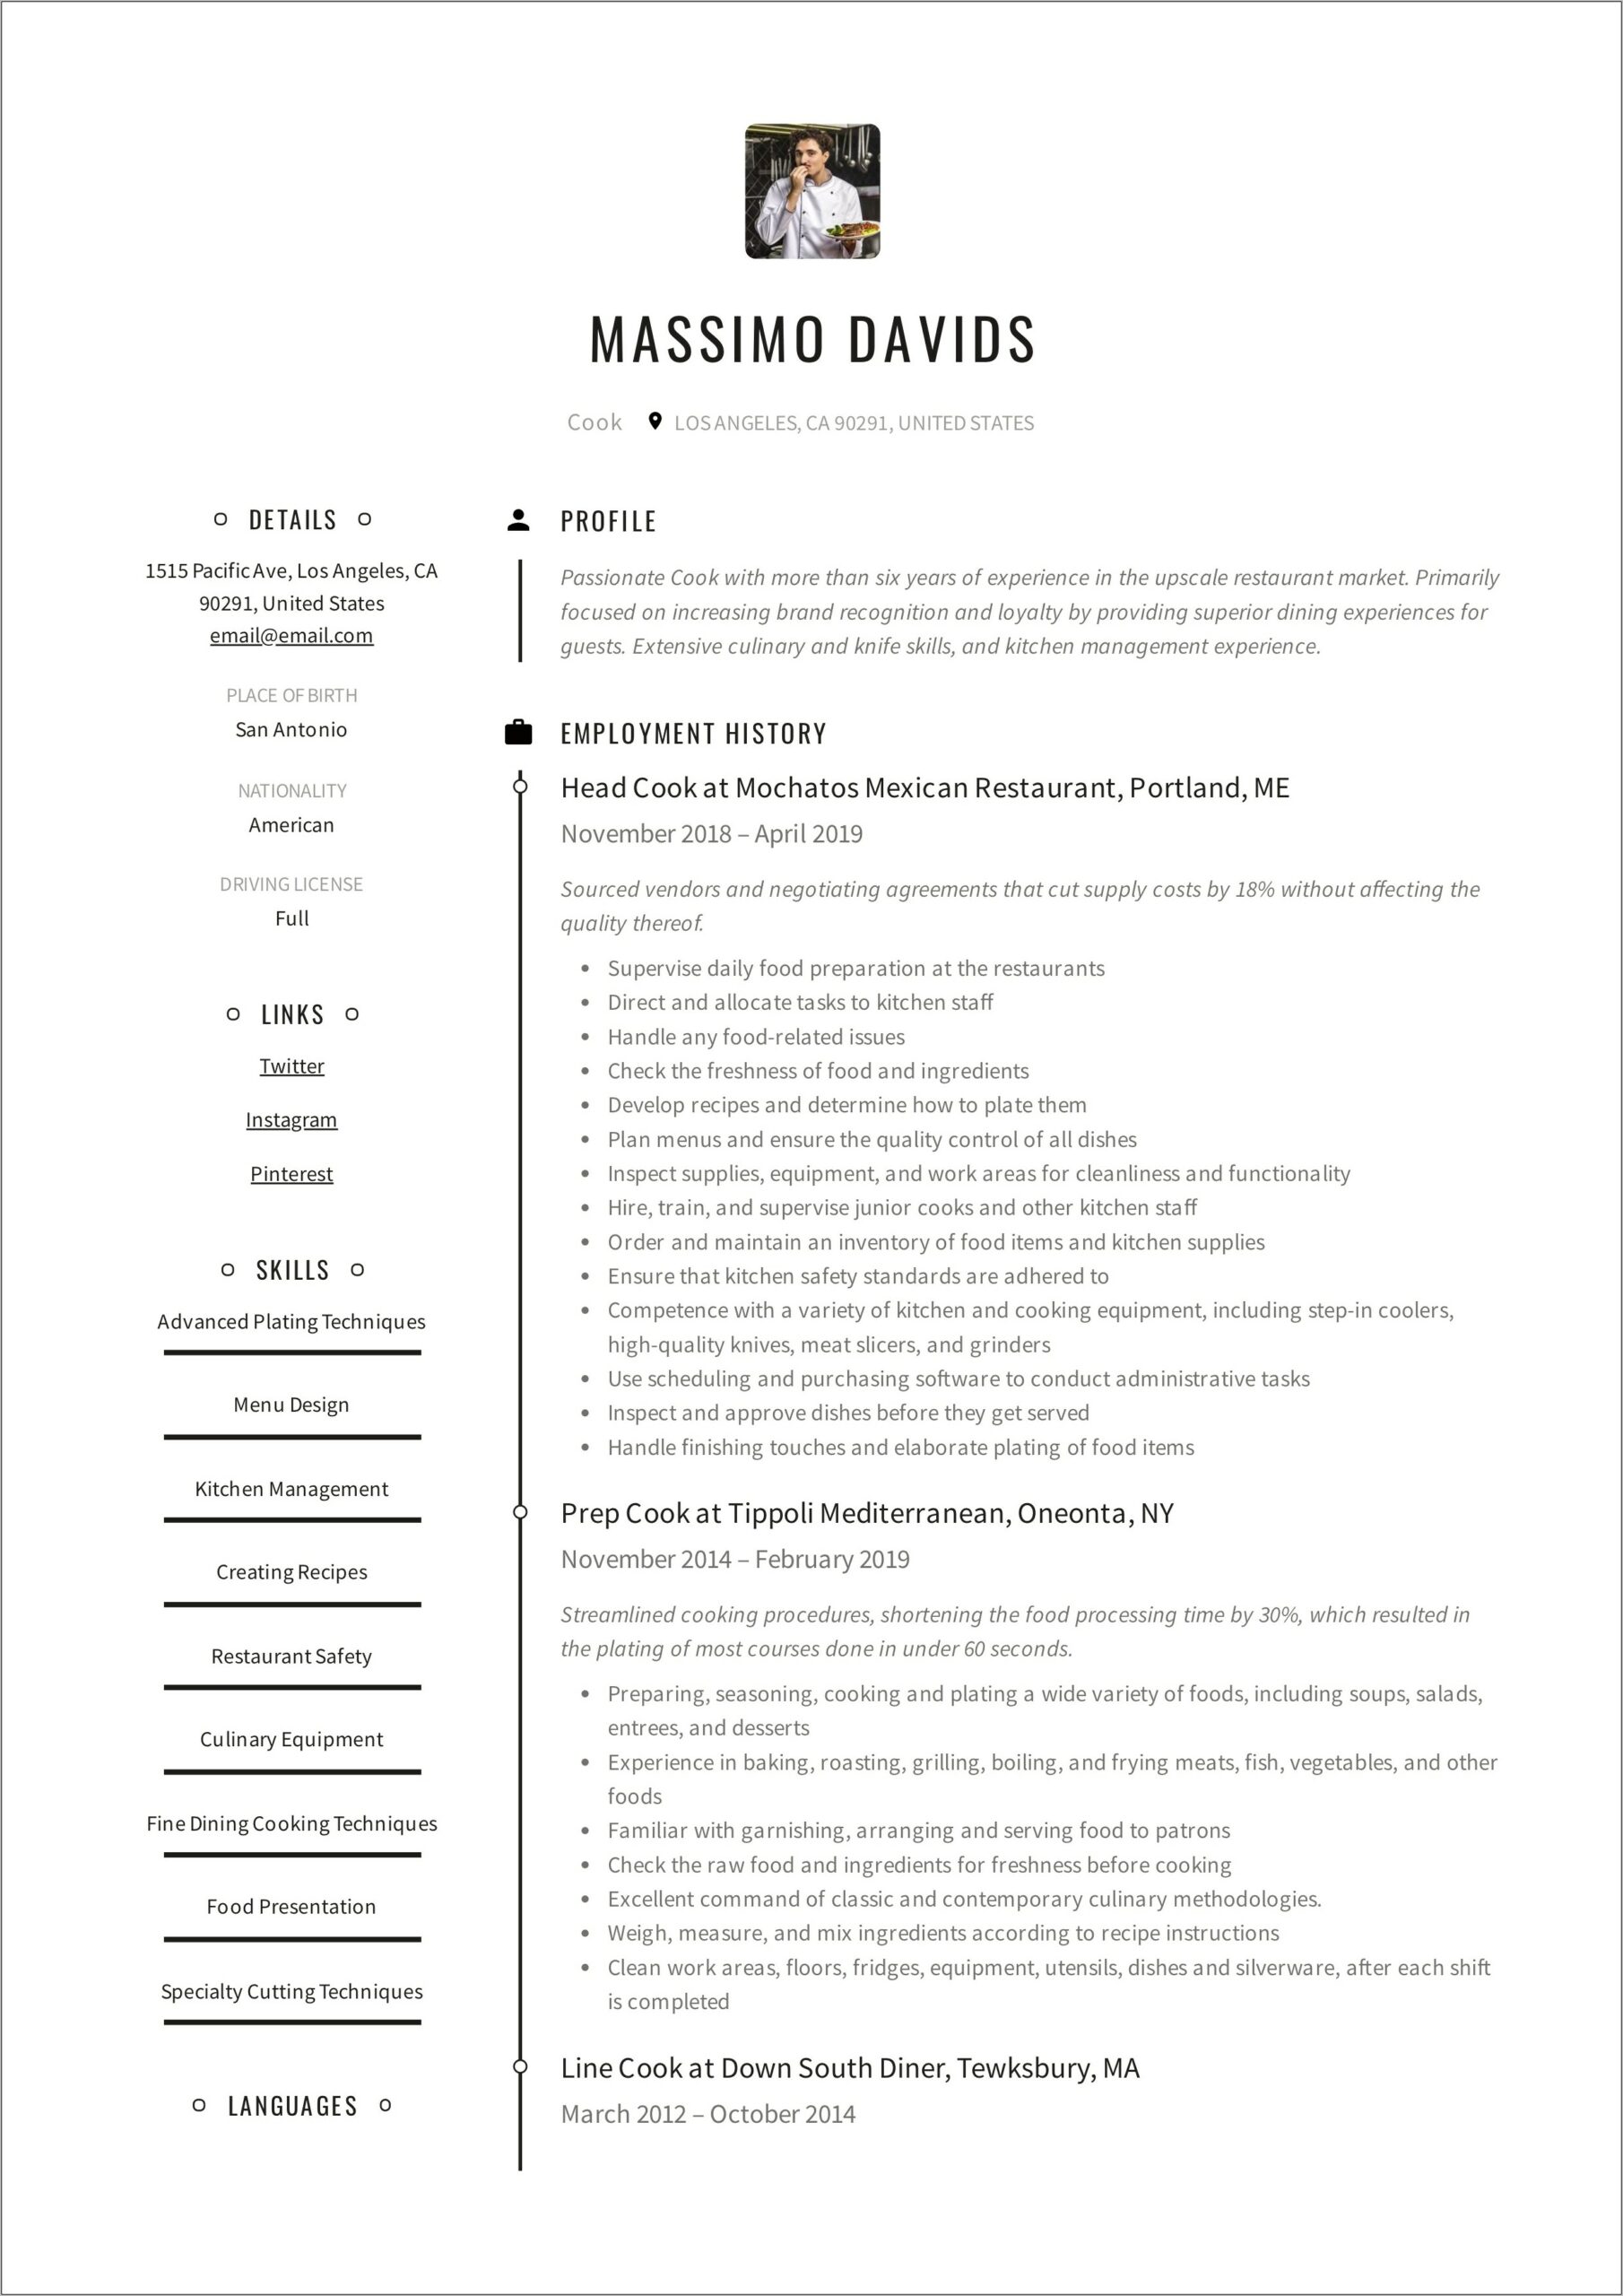 Entry Level Kitchen Cook Resume Objective Examples